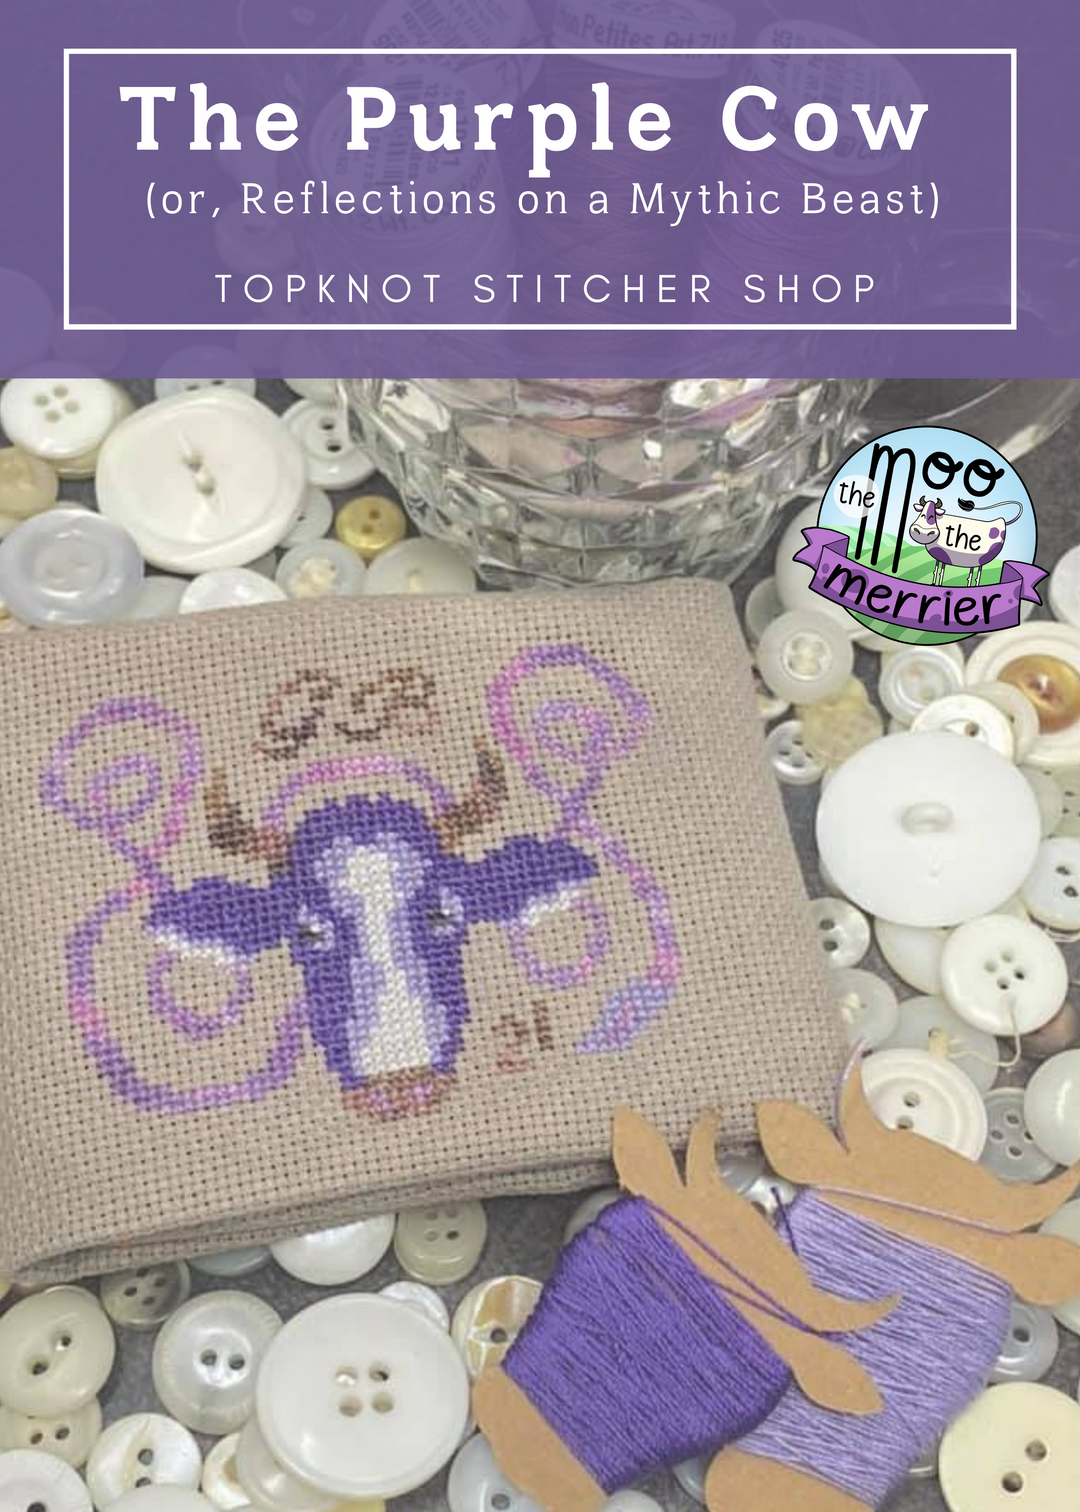 The Purple Cow (PDF) - The Moo The Merrier | TopKnot Stitcher Shop -  PDF Download